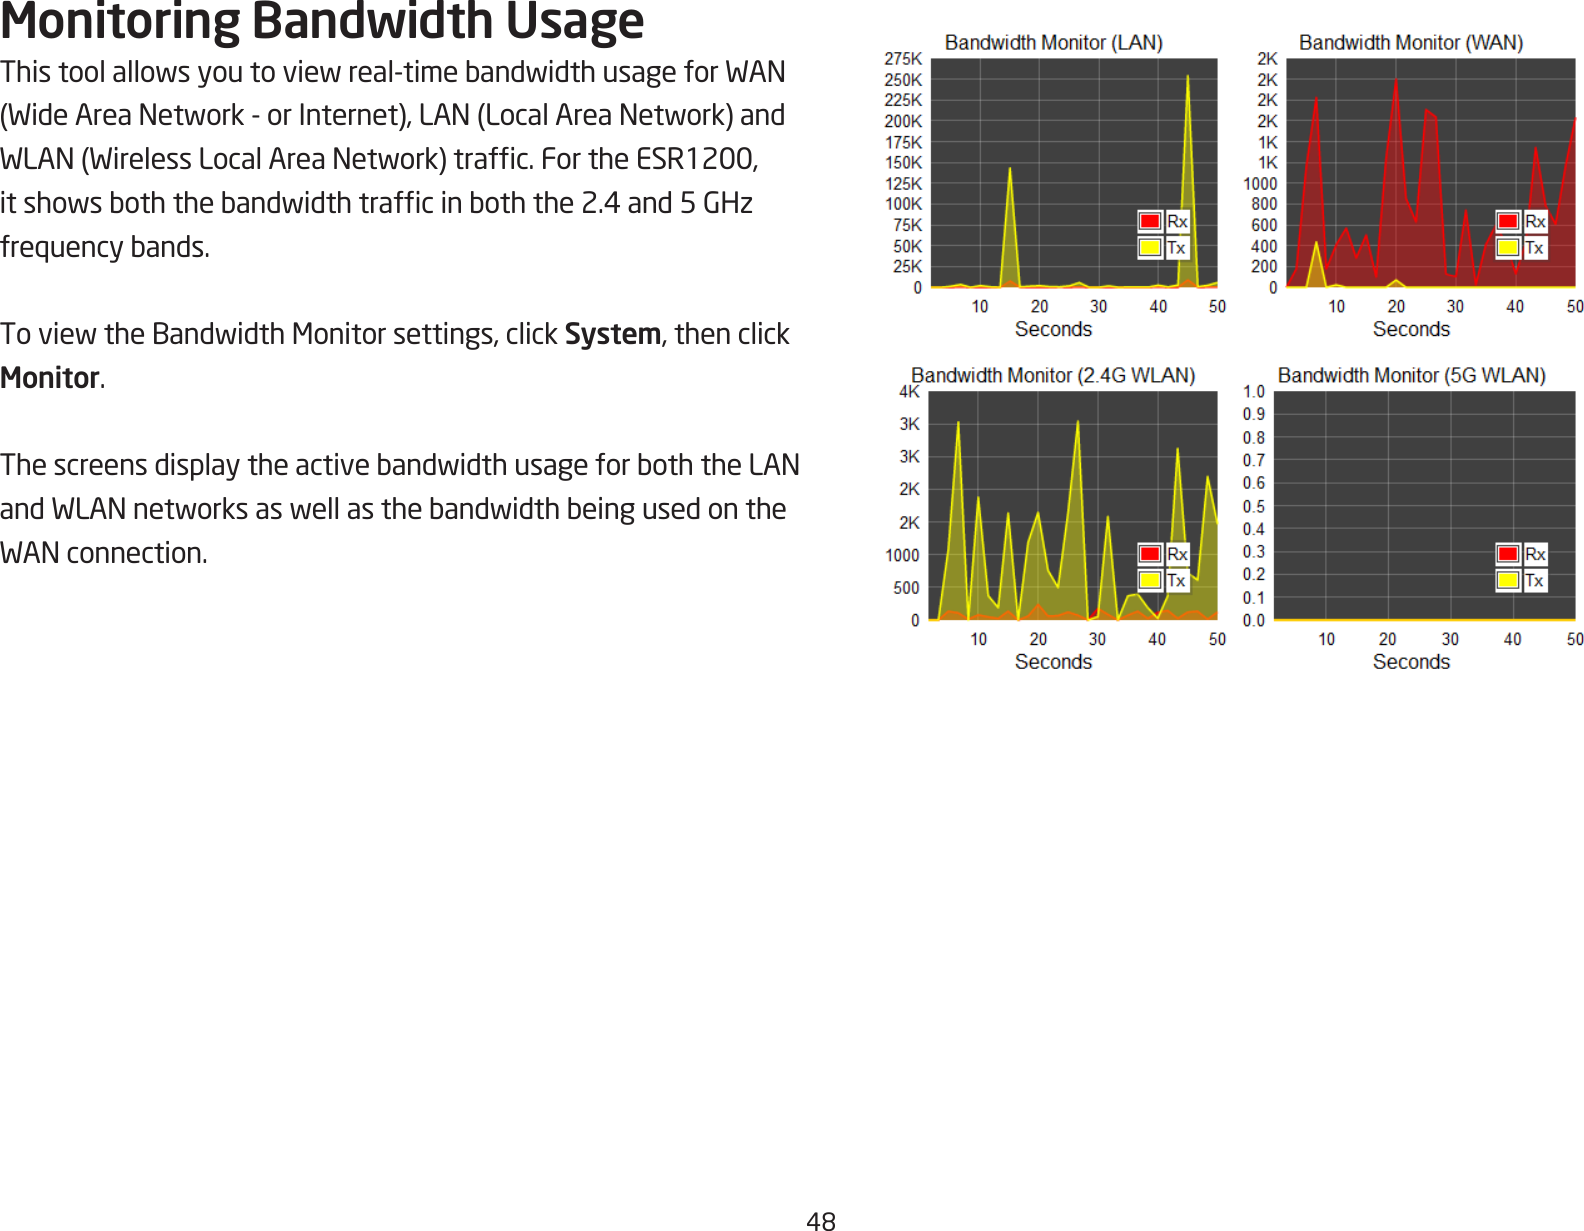 48Monitoring Bandwidth UsageThistoolallowsyoutoviewreal-timebandwidthusageforWAN(WideAreaNetwork-orInternet),LAN(LocalAreaNetwork)andWLAN(WirelessLocalAreaNetwork)trafc.FortheESR1200,itshowsboththebandwidthtrafcinboththe2.4and5GHzfrequencybands.ToviewtheBandwidthMonitorsettings,clickSystem, then click Monitor.ThescreensdisplaytheactivebandwidthusageforboththeLANandWLANnetworksaswellasthebandwidthbeingusedontheWANconnection.